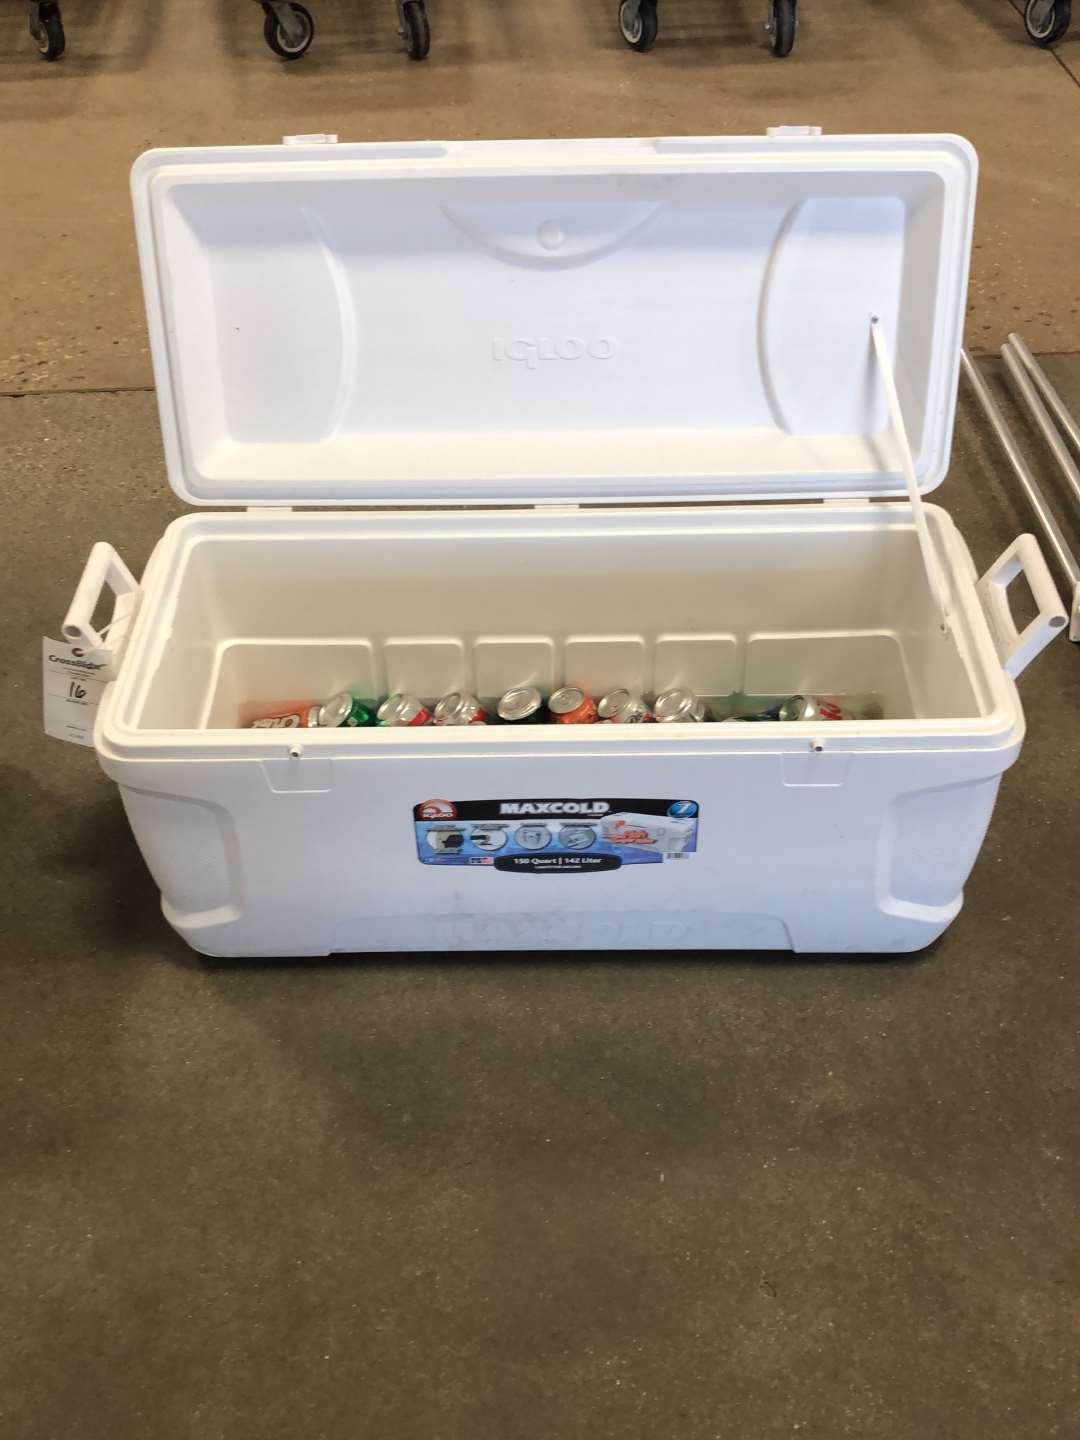 (1) Igloo 150 Quart Cooler Filled With Misc. Cans Of Pop